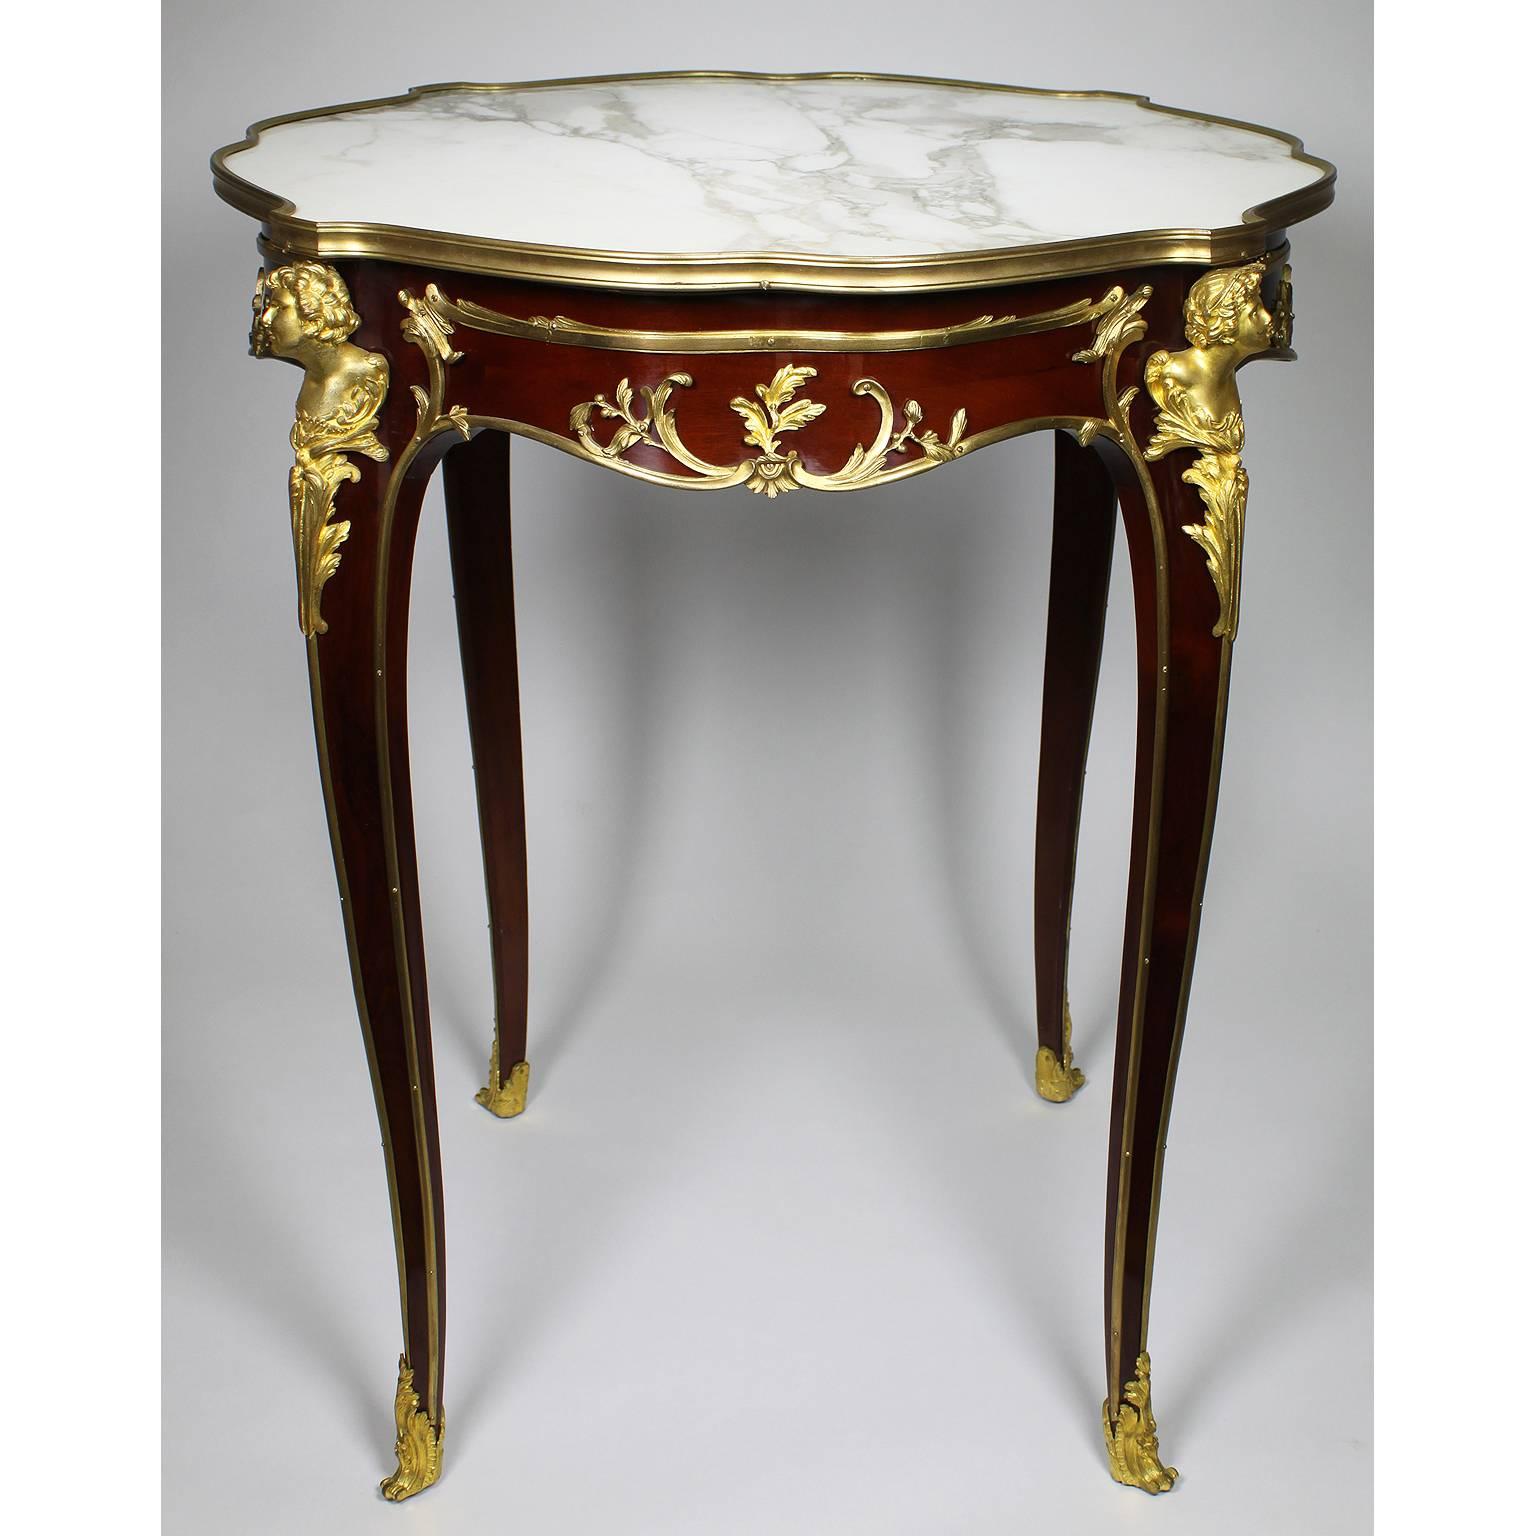 A very fine French Louis XV style figural gilt-bronze mounted mahogany guèridon side-table fitted with a mottled white and rouge marble-inset top, attributed to François Linke (1855-1946). The ormolu signed: F. Linke and stamped on the back 